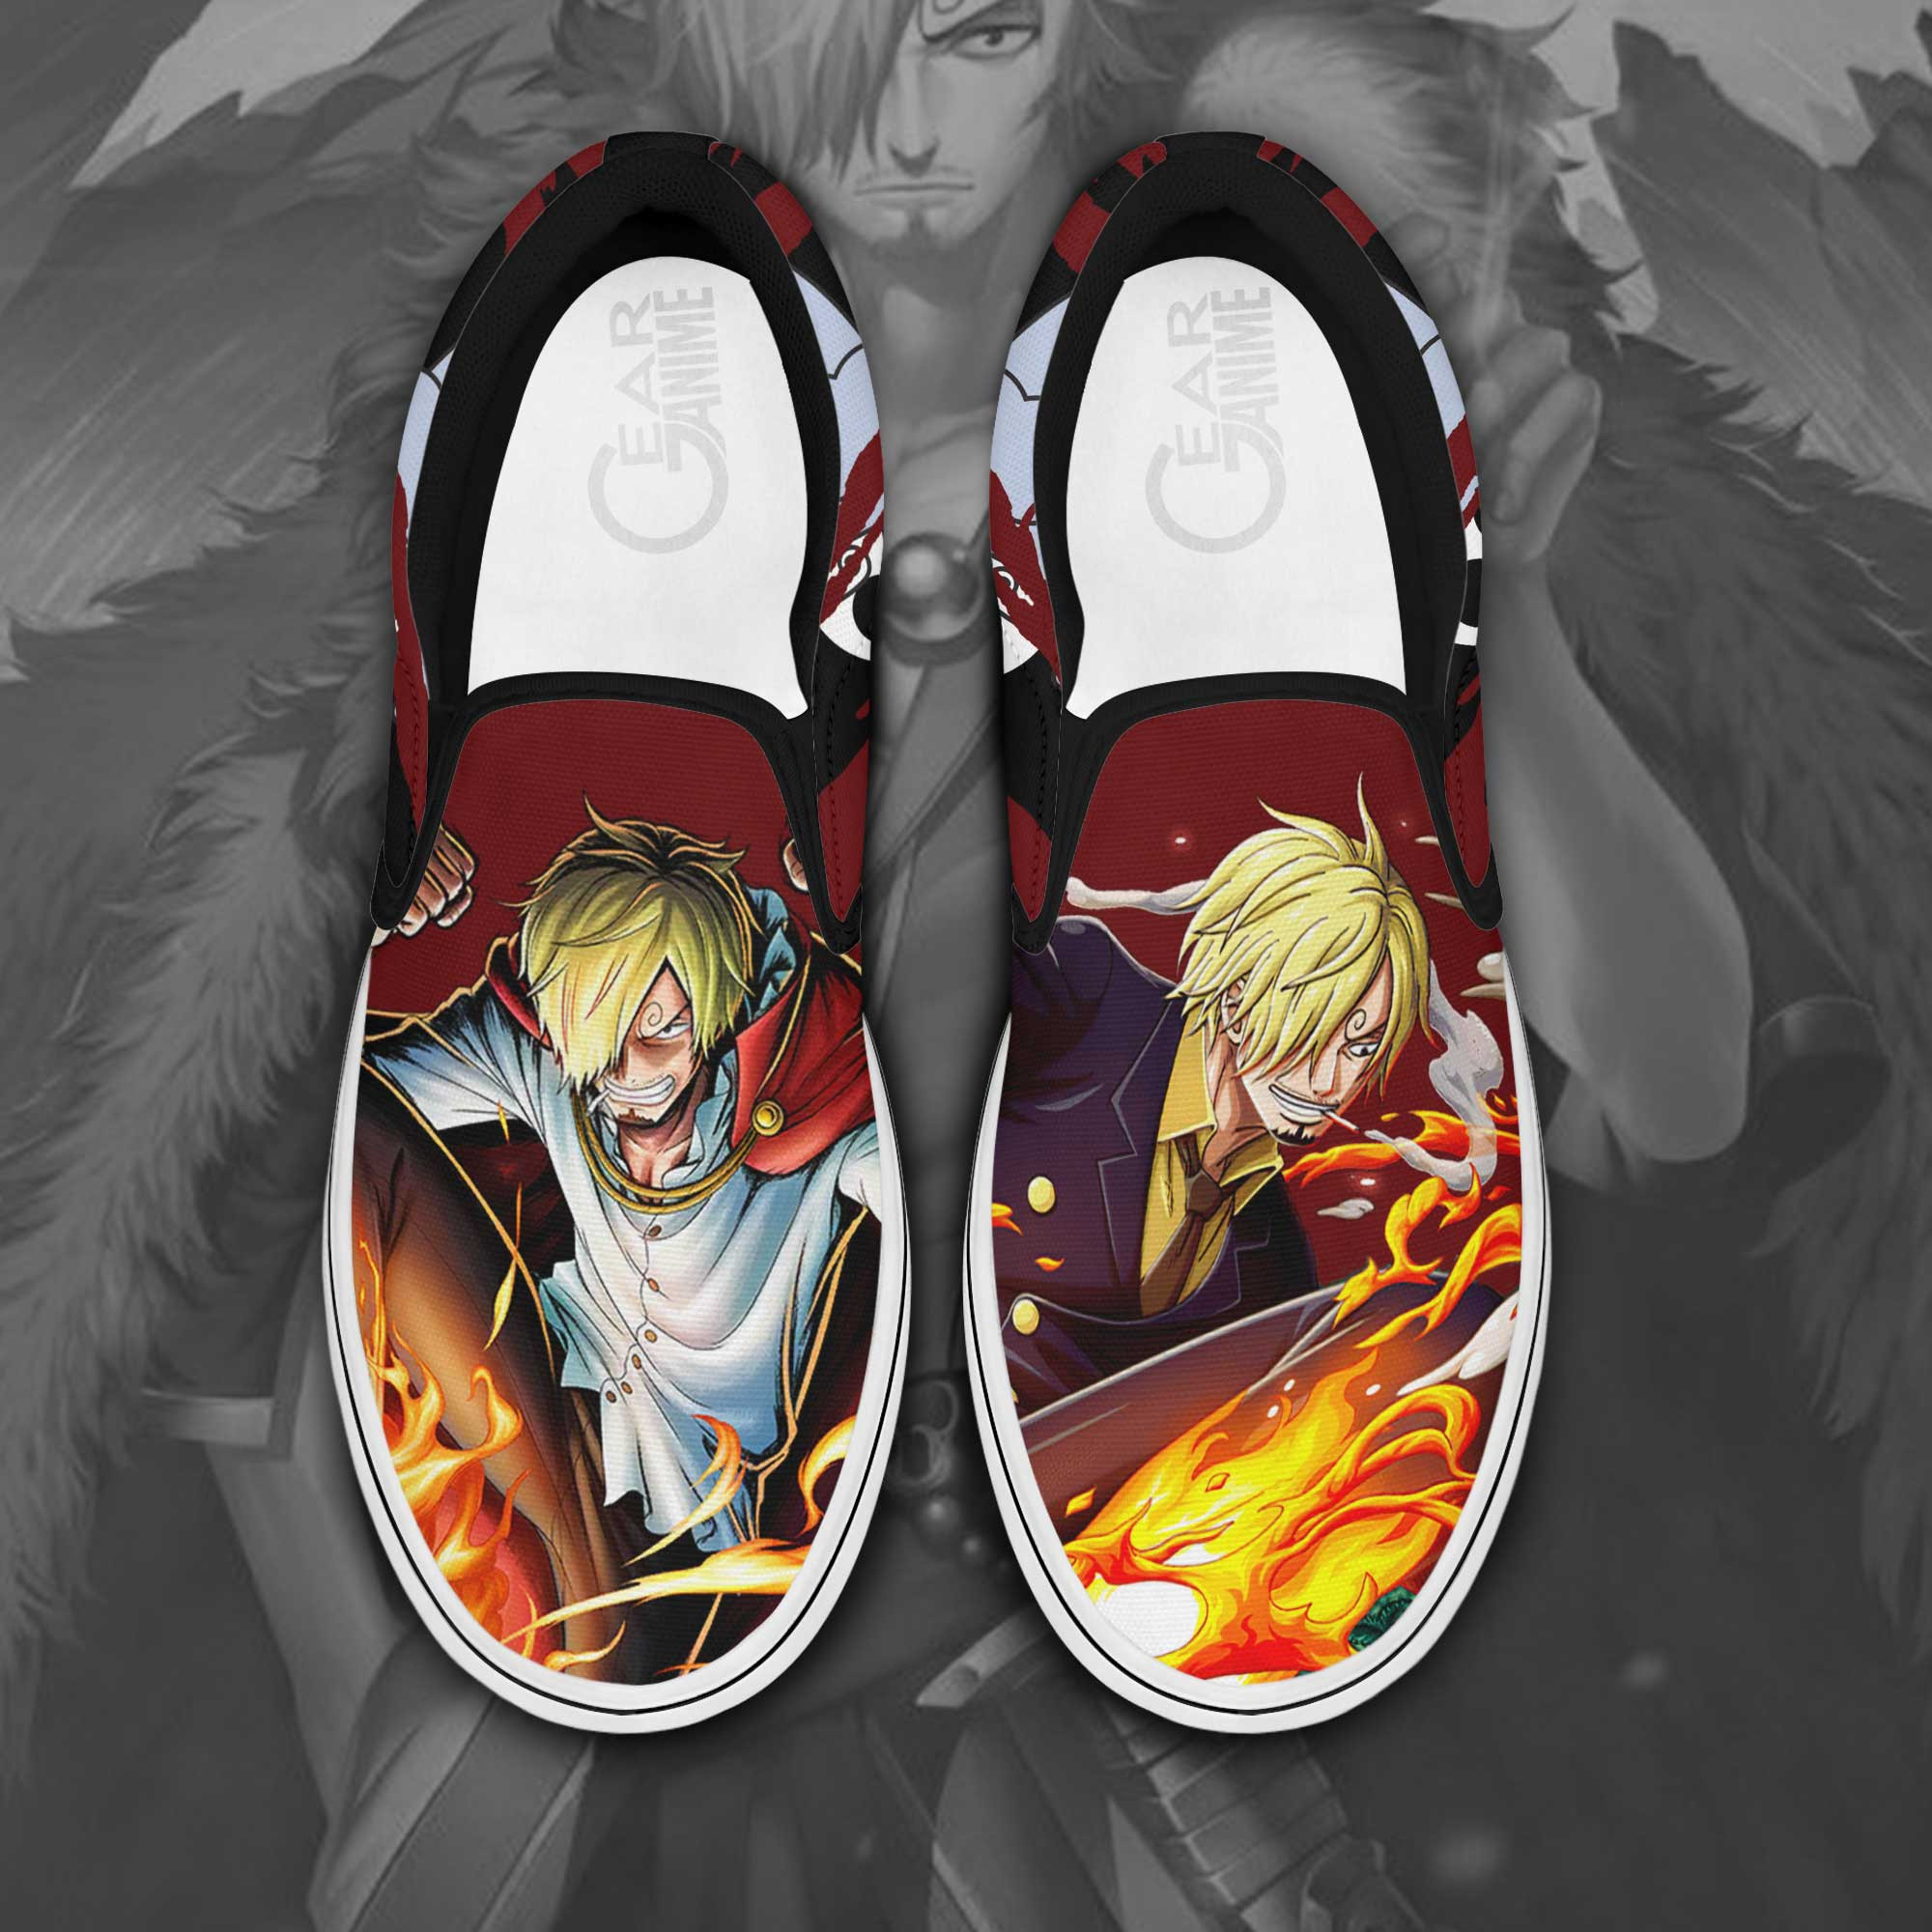 These Sneakers are a must-have for any Anime fan 64